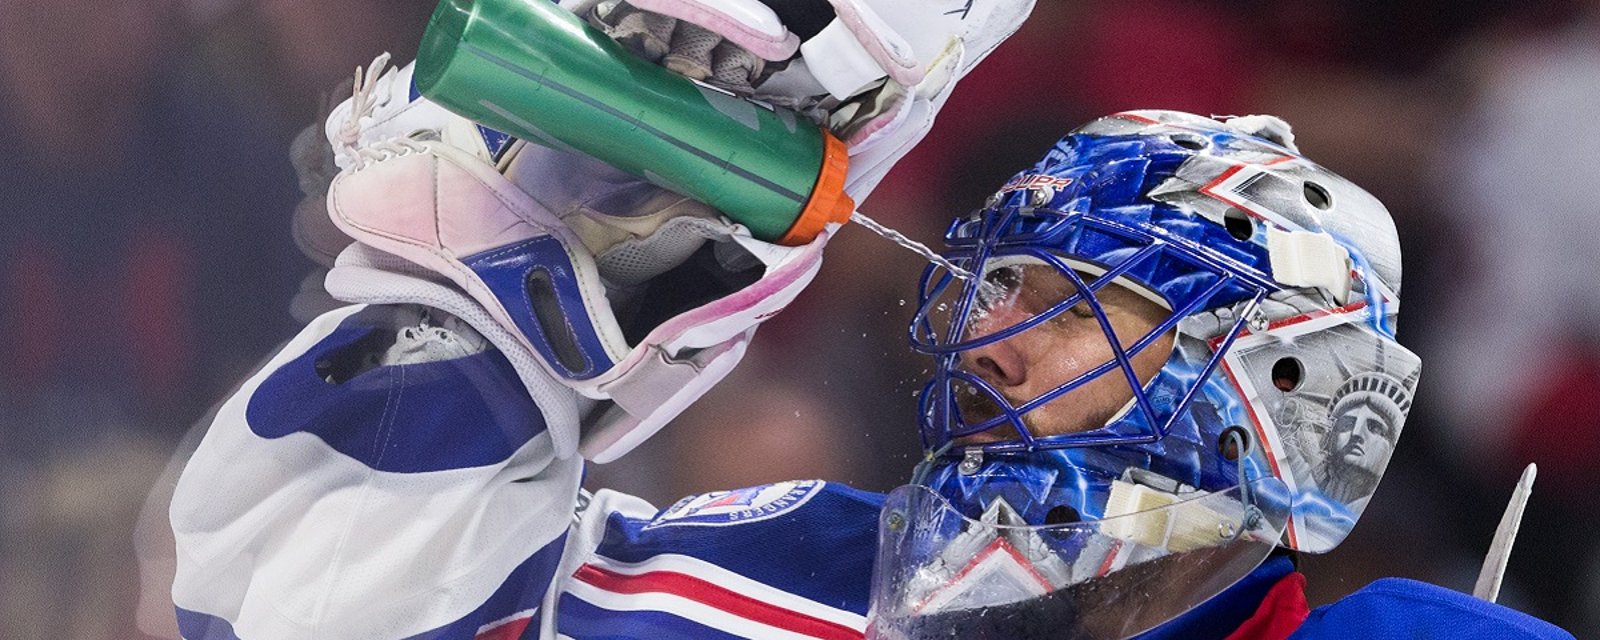 Lundqvist slams his team after 'embarrassing' loss